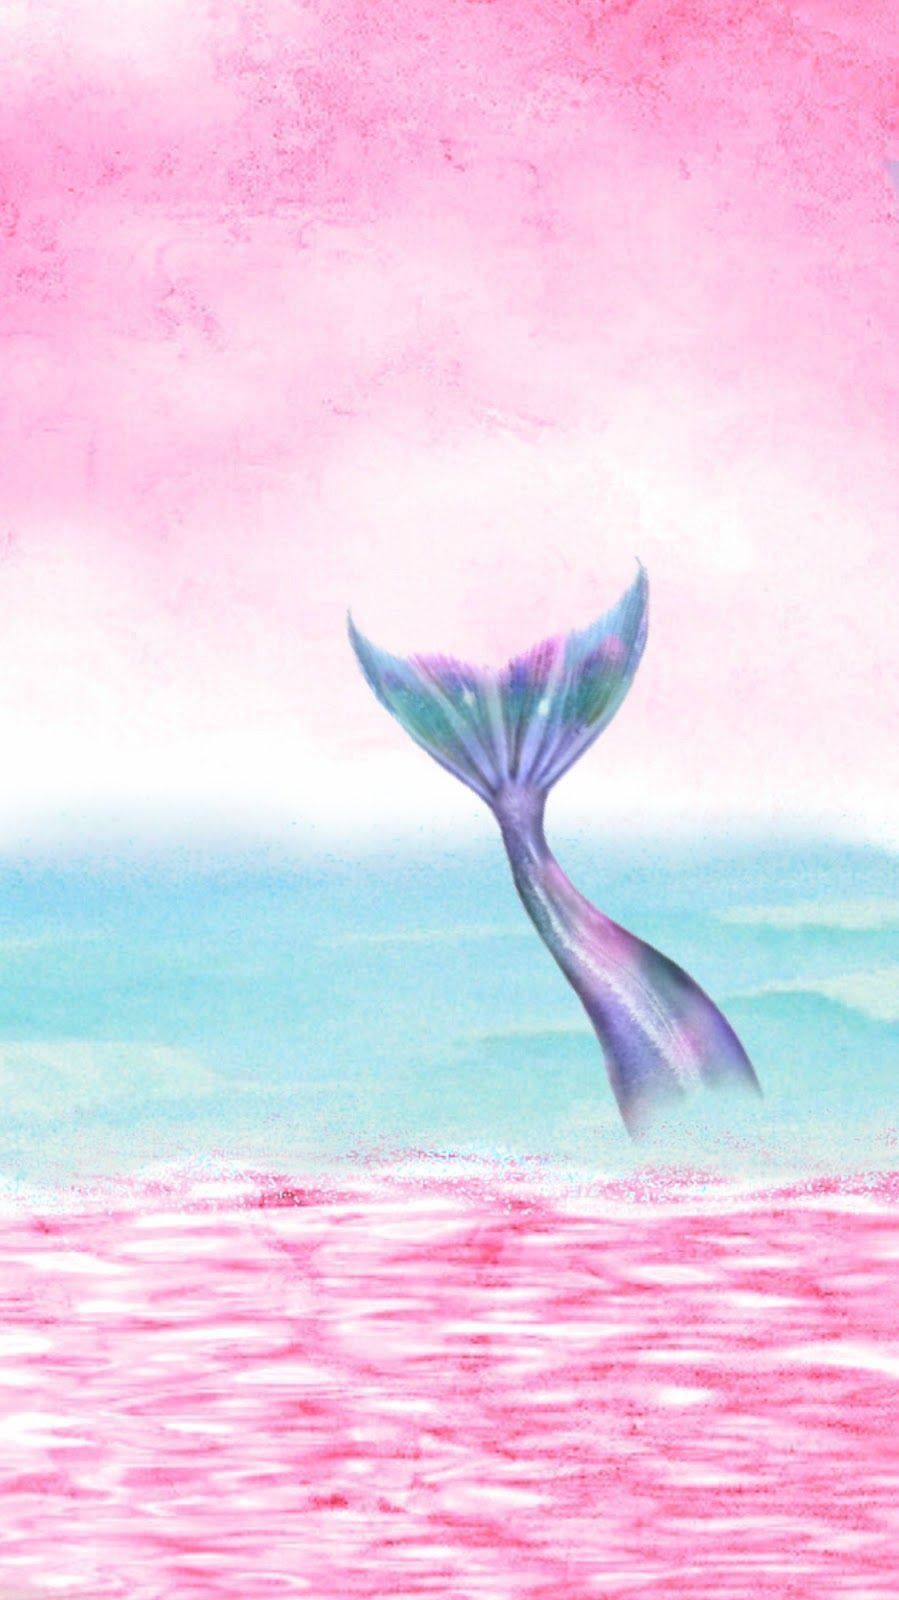 A painting of an ocean with pink and purple water - Mermaid